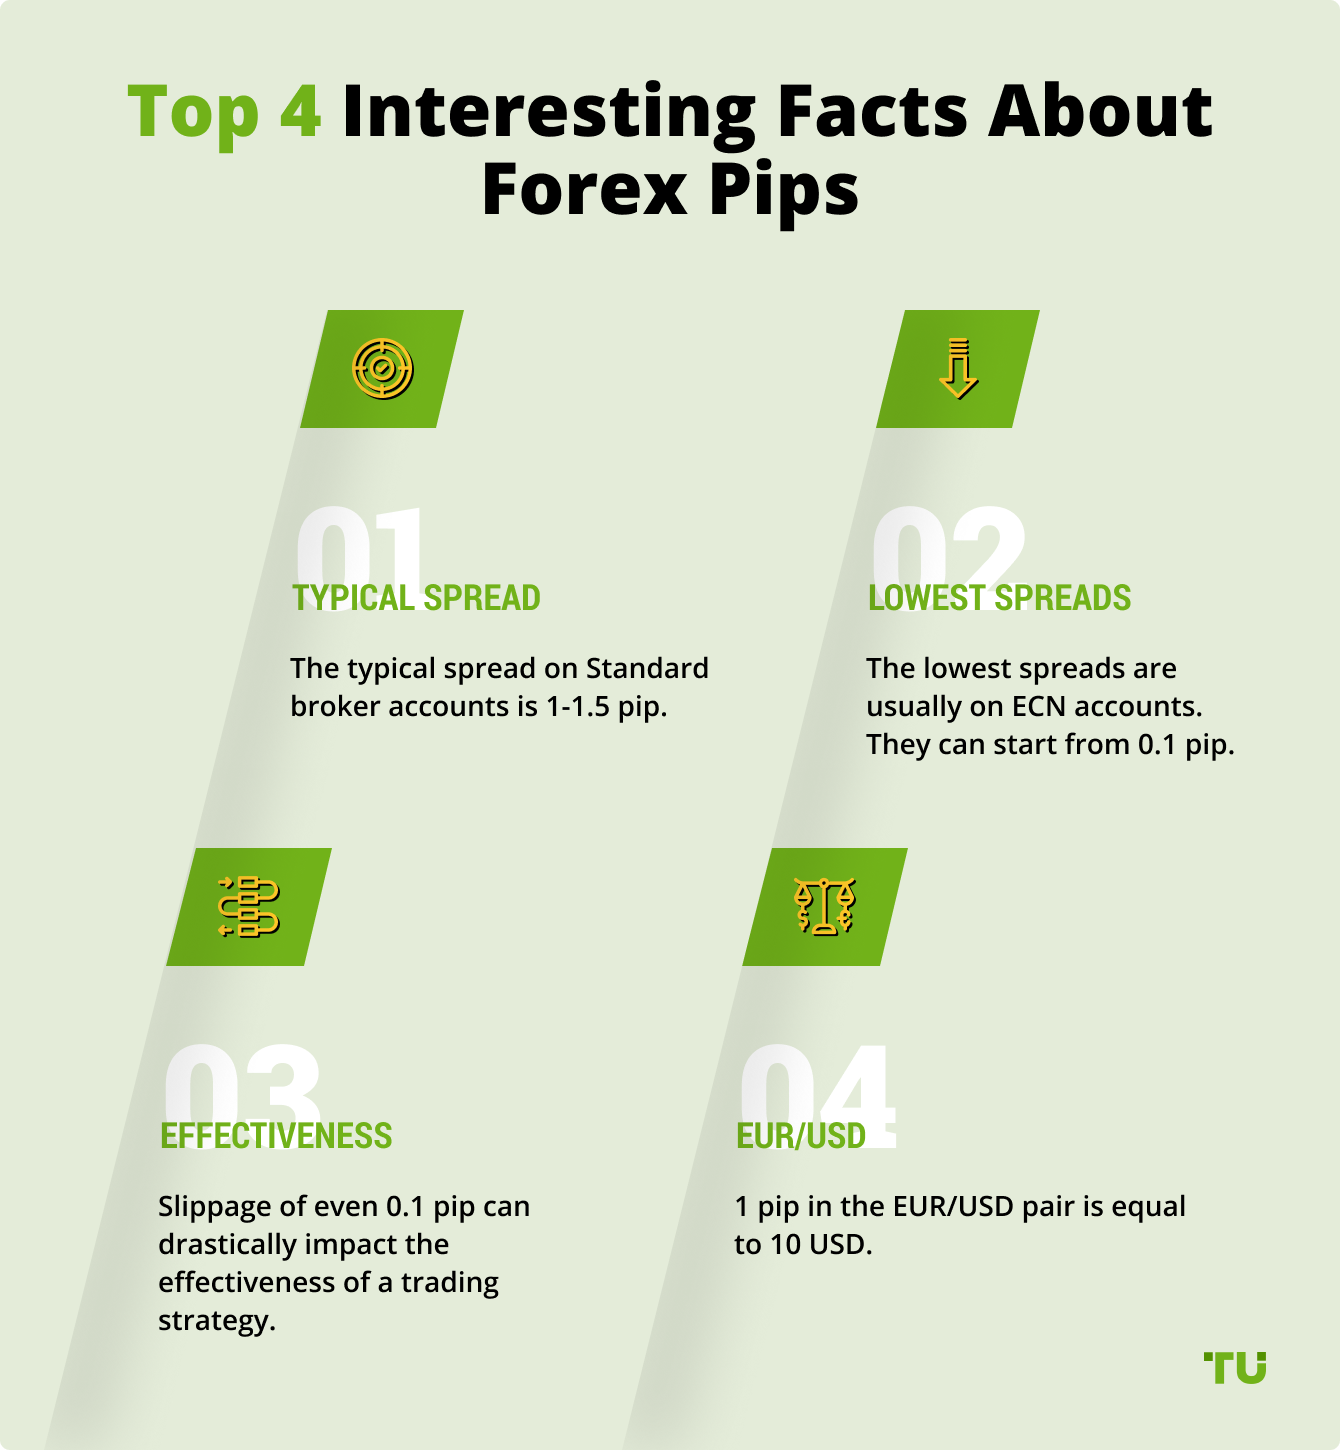 Top 4 Interesting Facts About Forex Pips